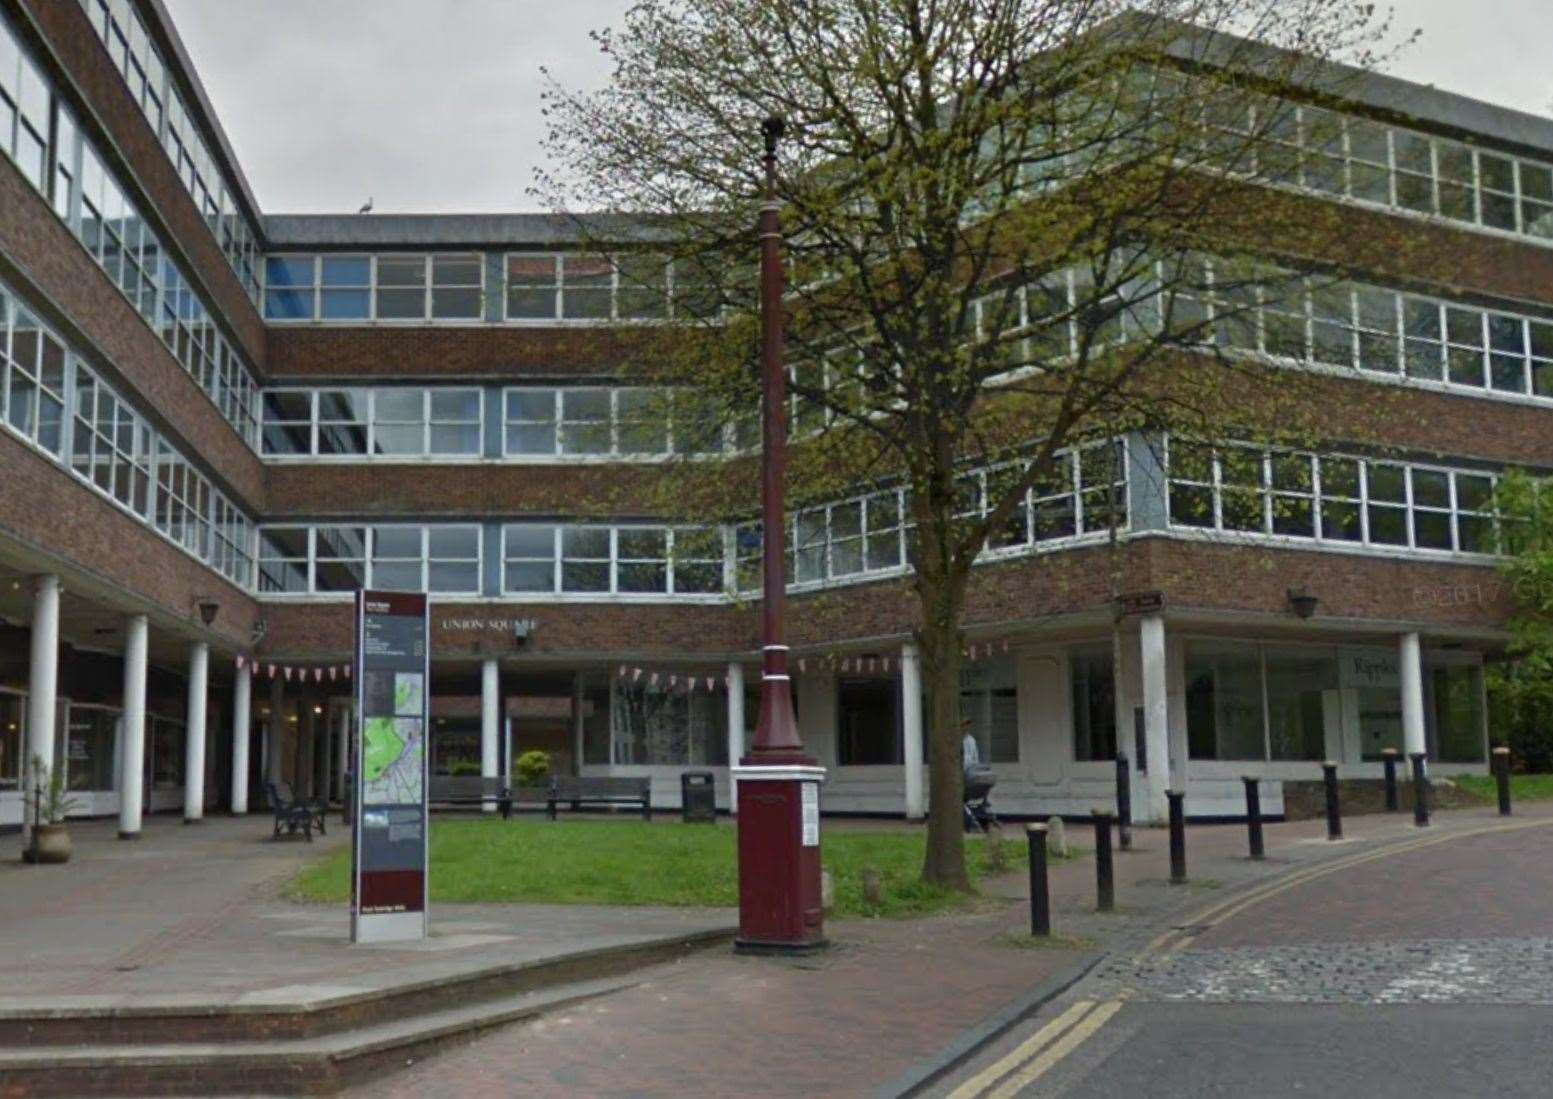 The site was once home to Union House, a 1960s office block which was demolished. Picture: Google